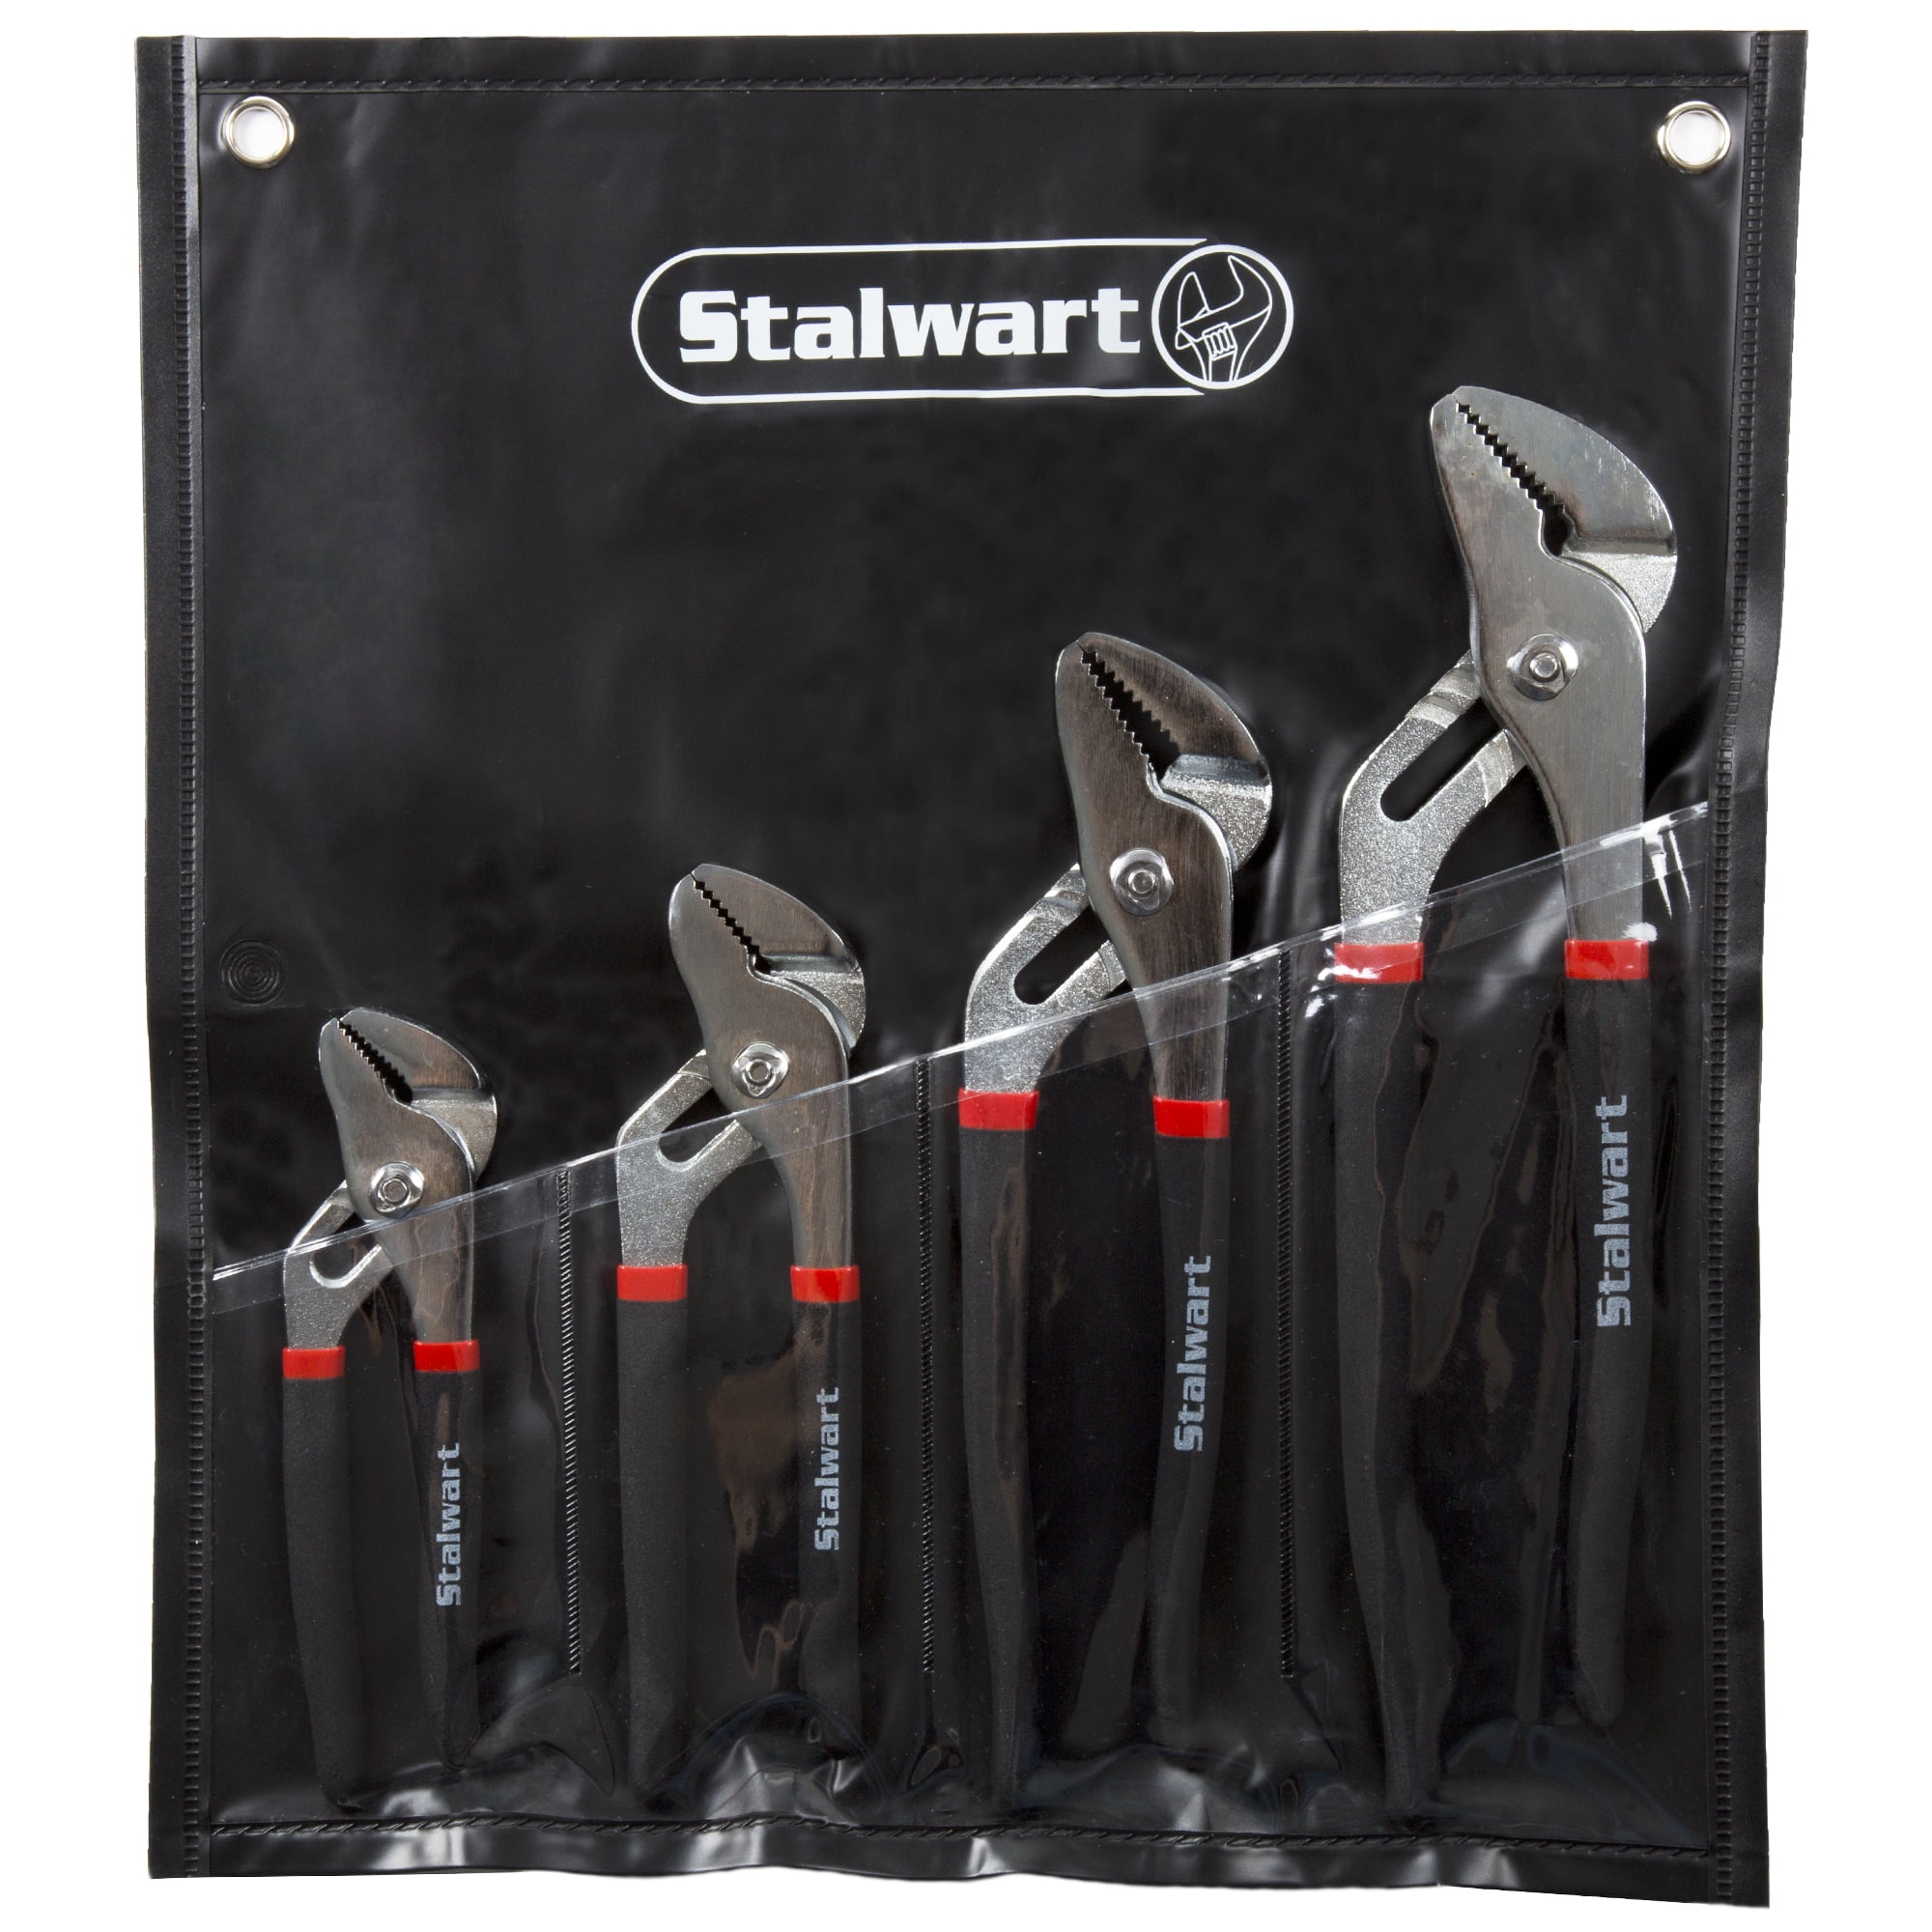 Stalwart 75-HT3003 Groove Joint Plier Set with Storage Pouch 4 Piece 